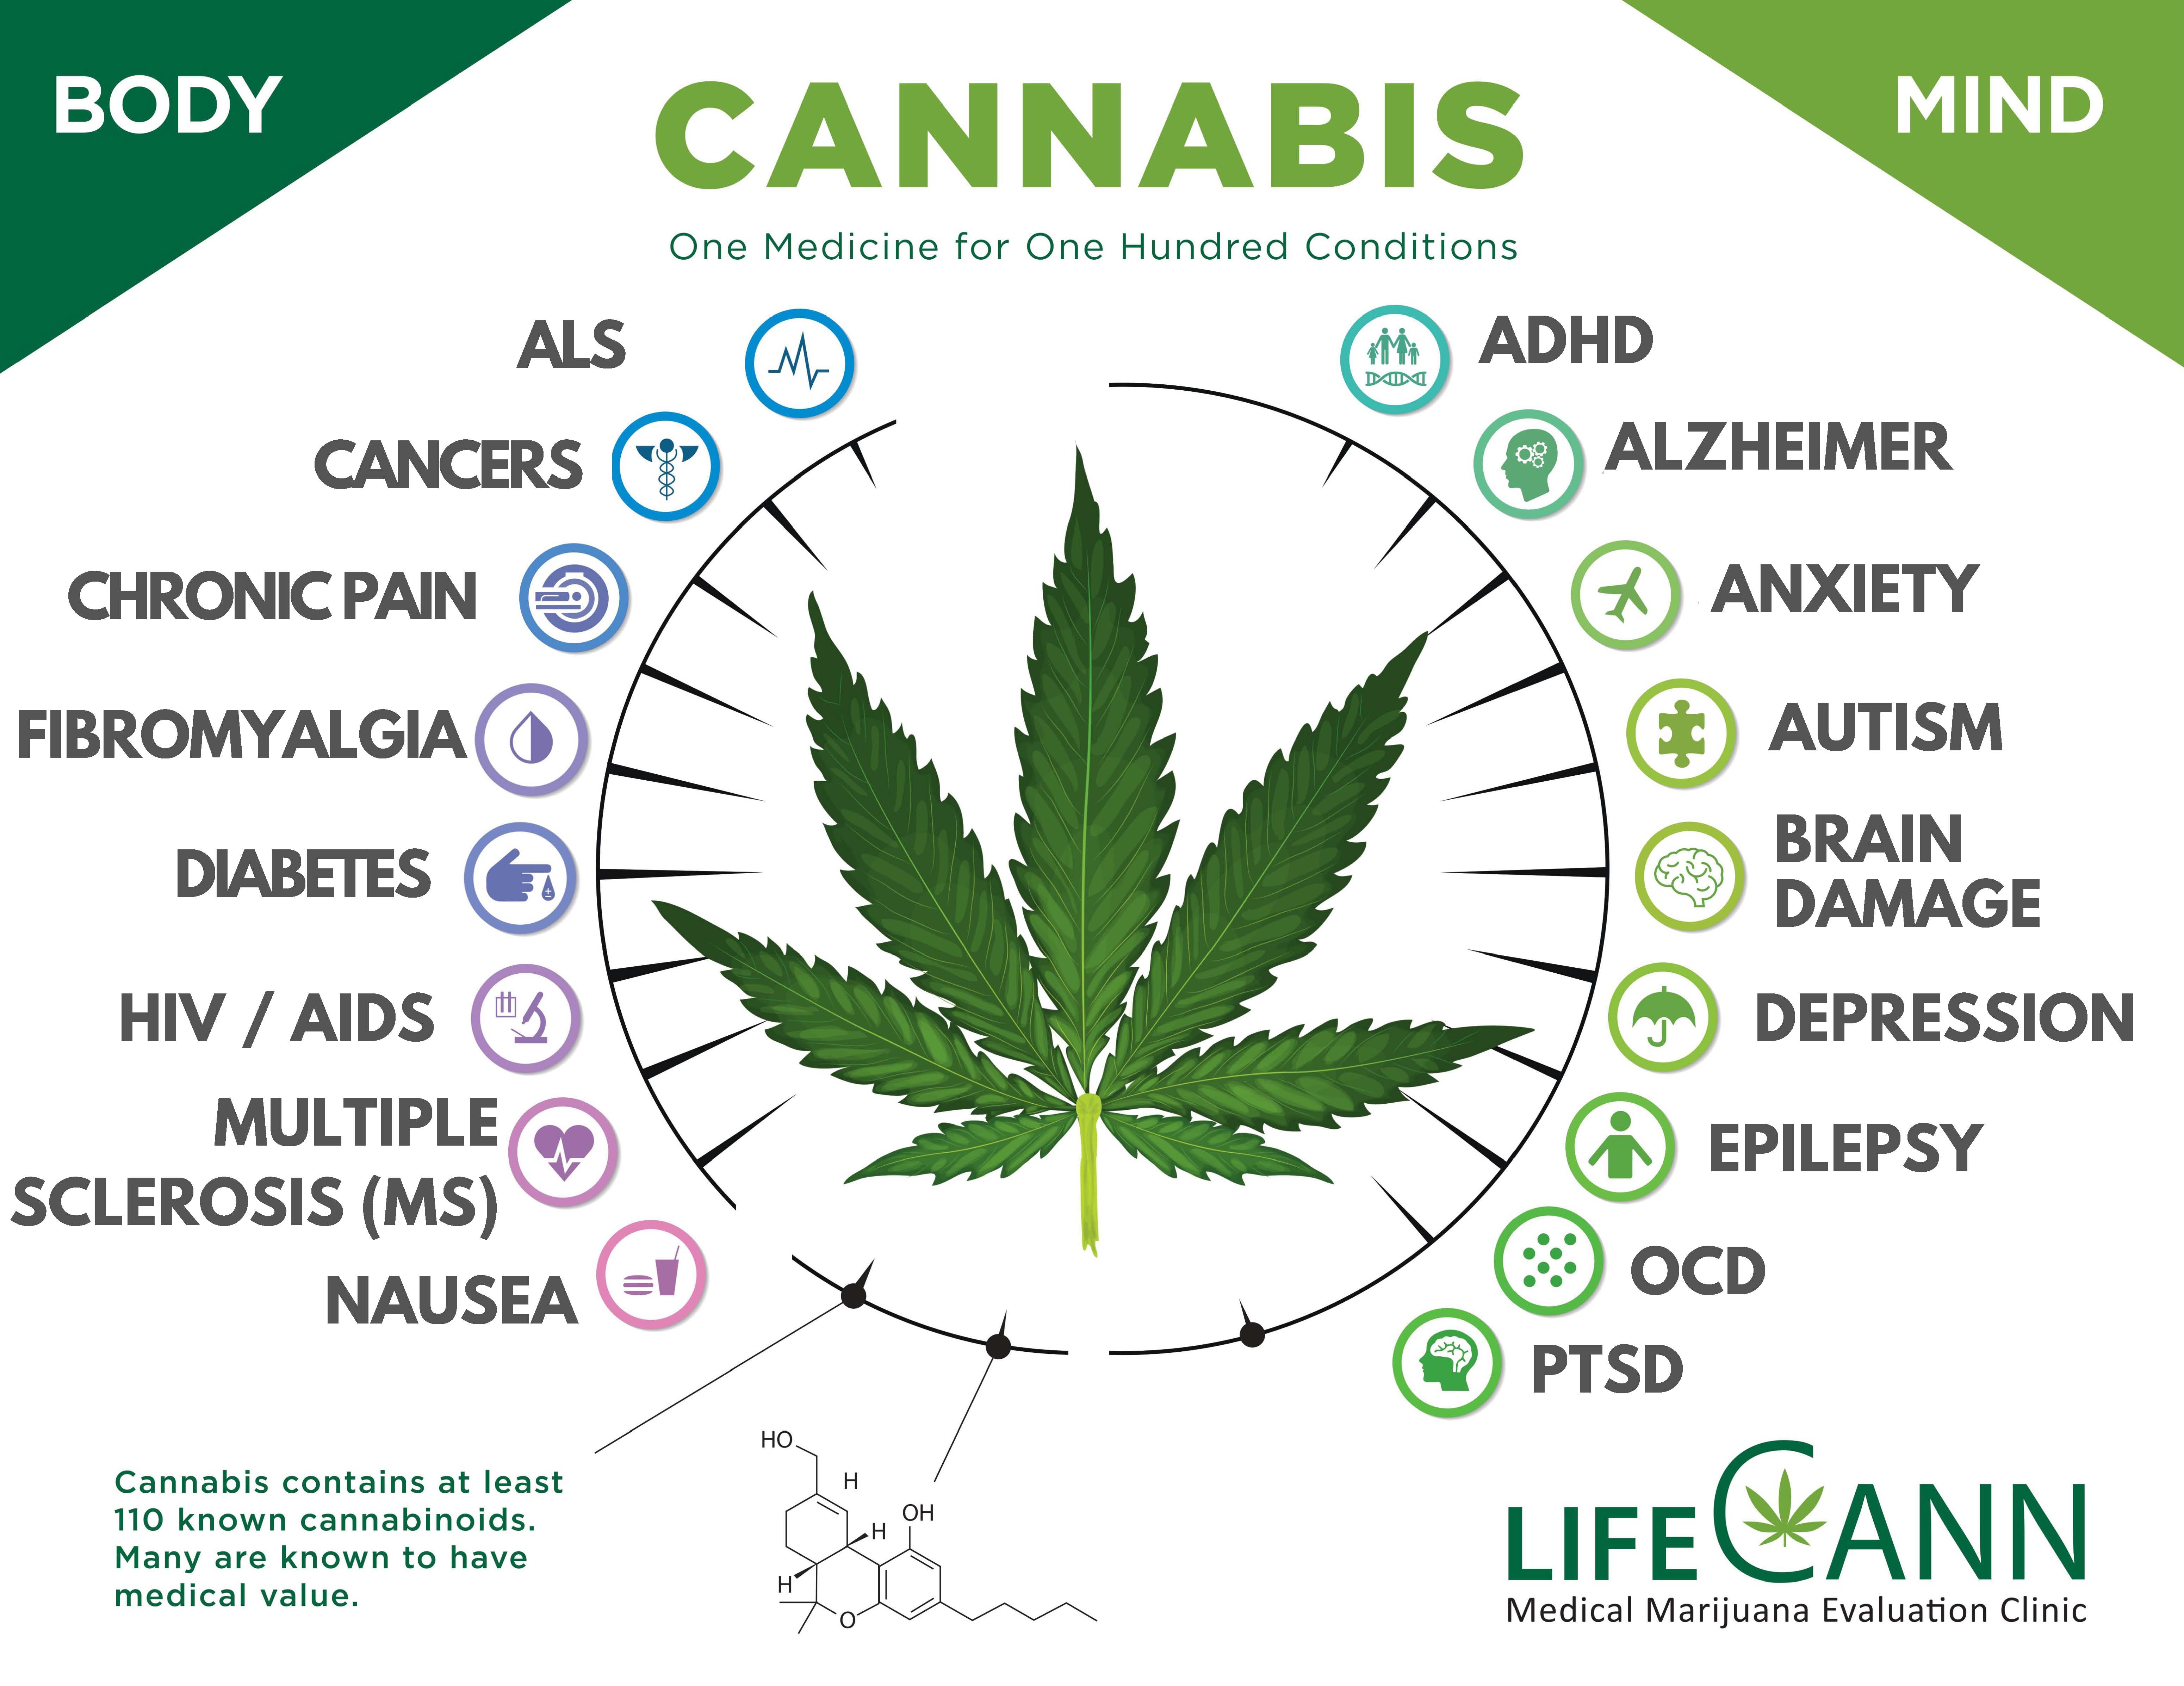 CANNABIS One Medicine for 100 Conditions